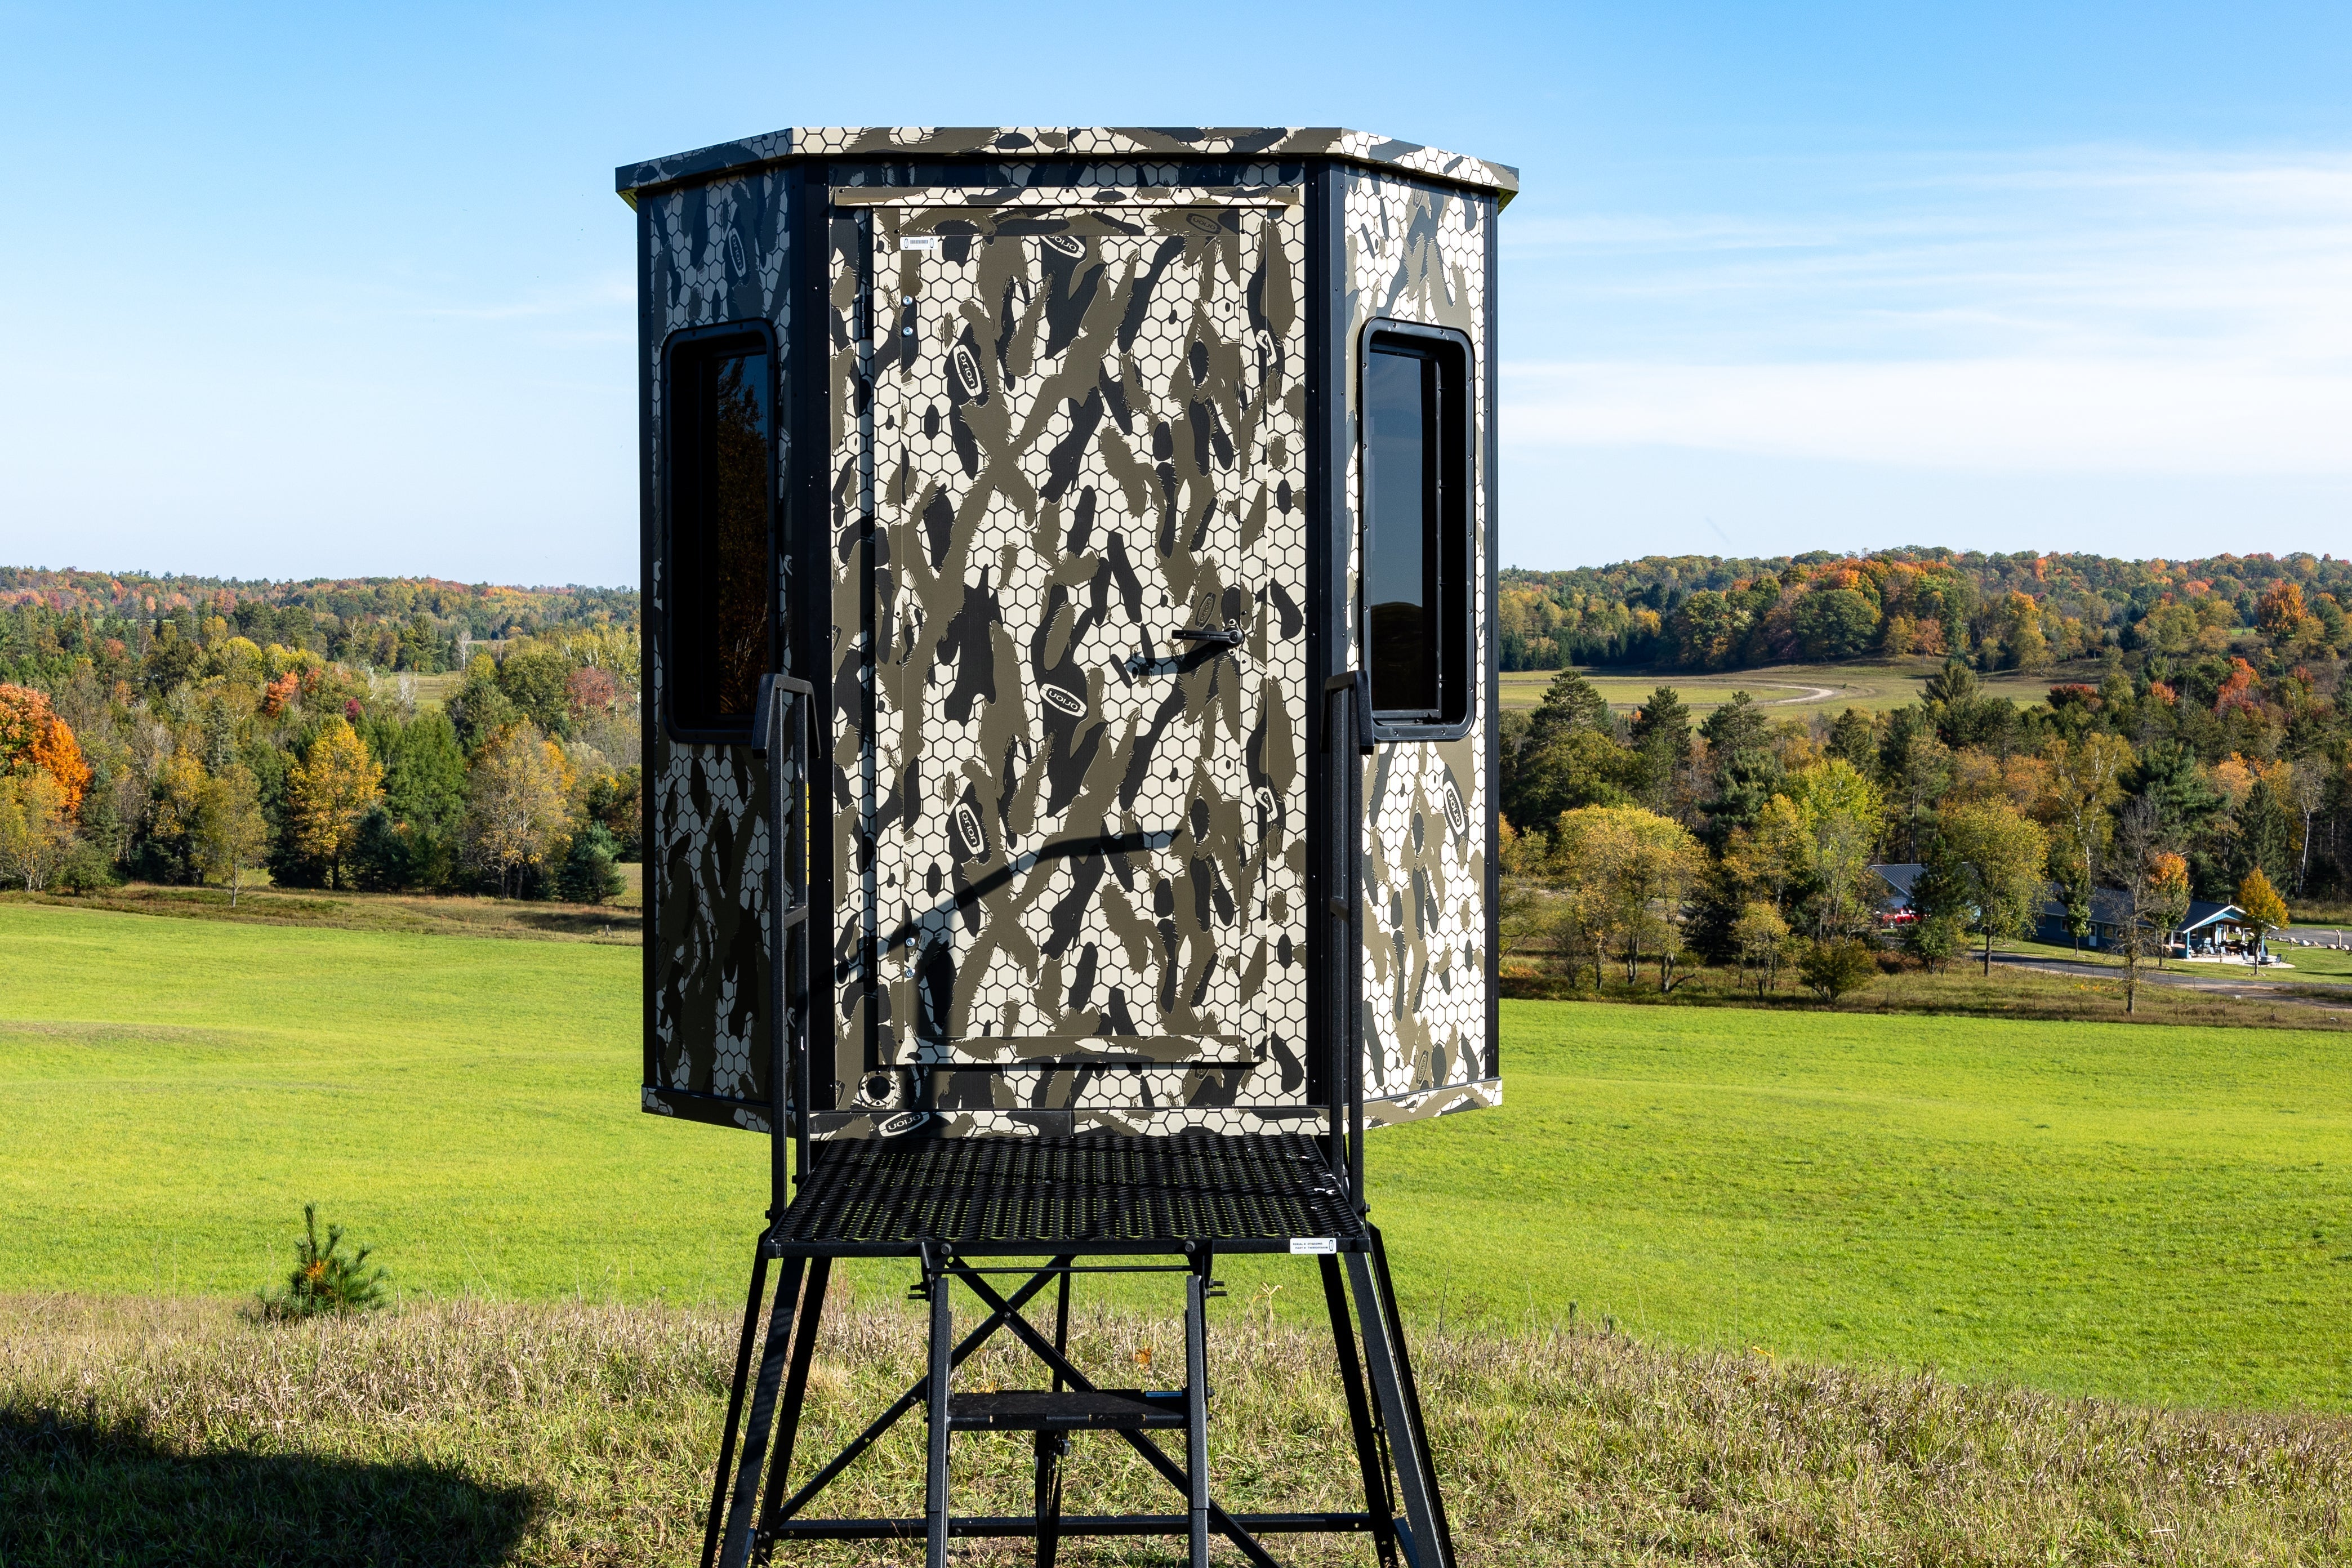 Orion 68VT - Modular Archery Deer Hunting Blind with Tinted Windows